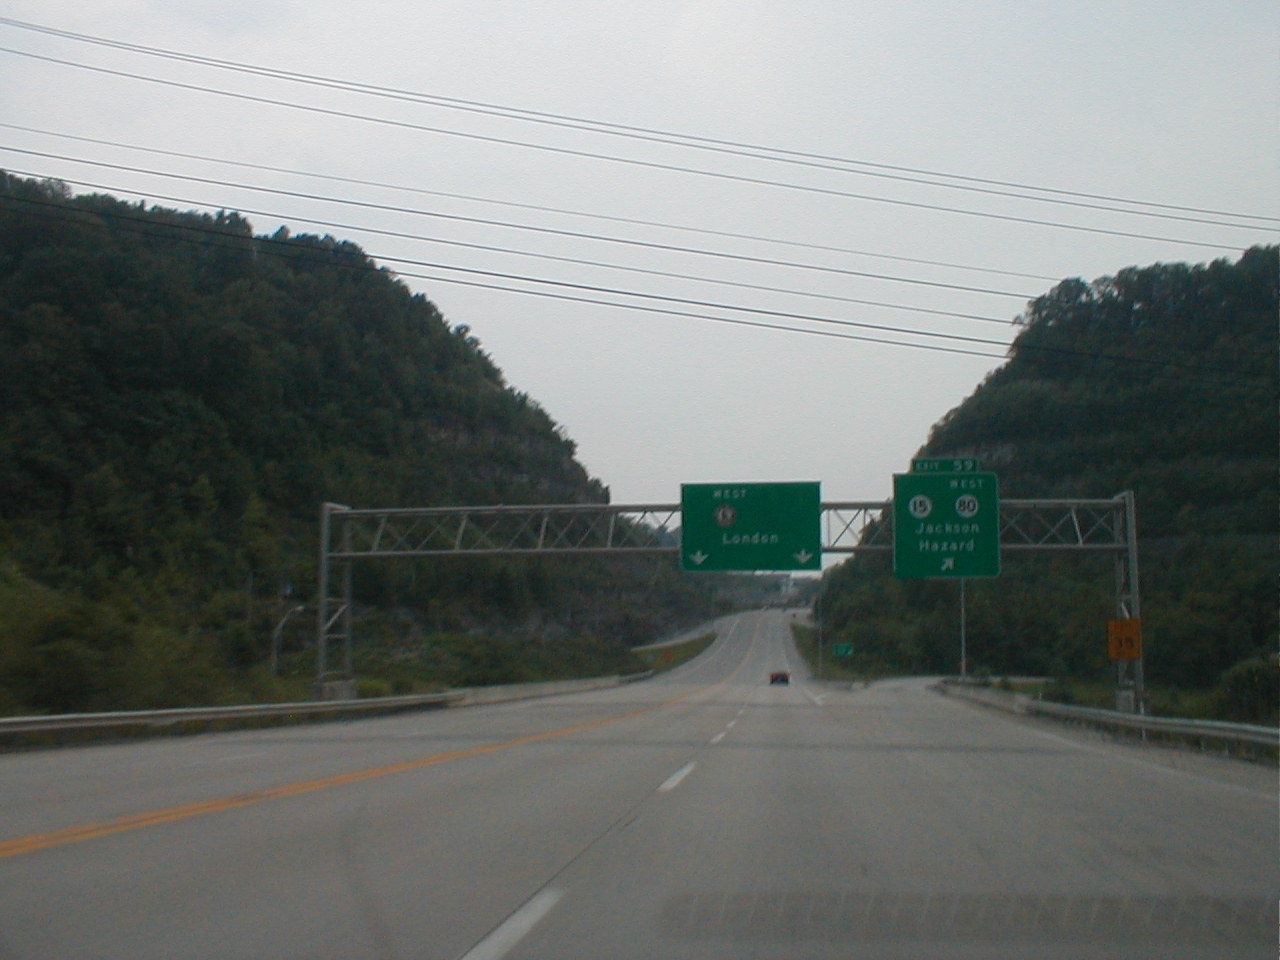 Entering the parkway heading westbound from KY 80.